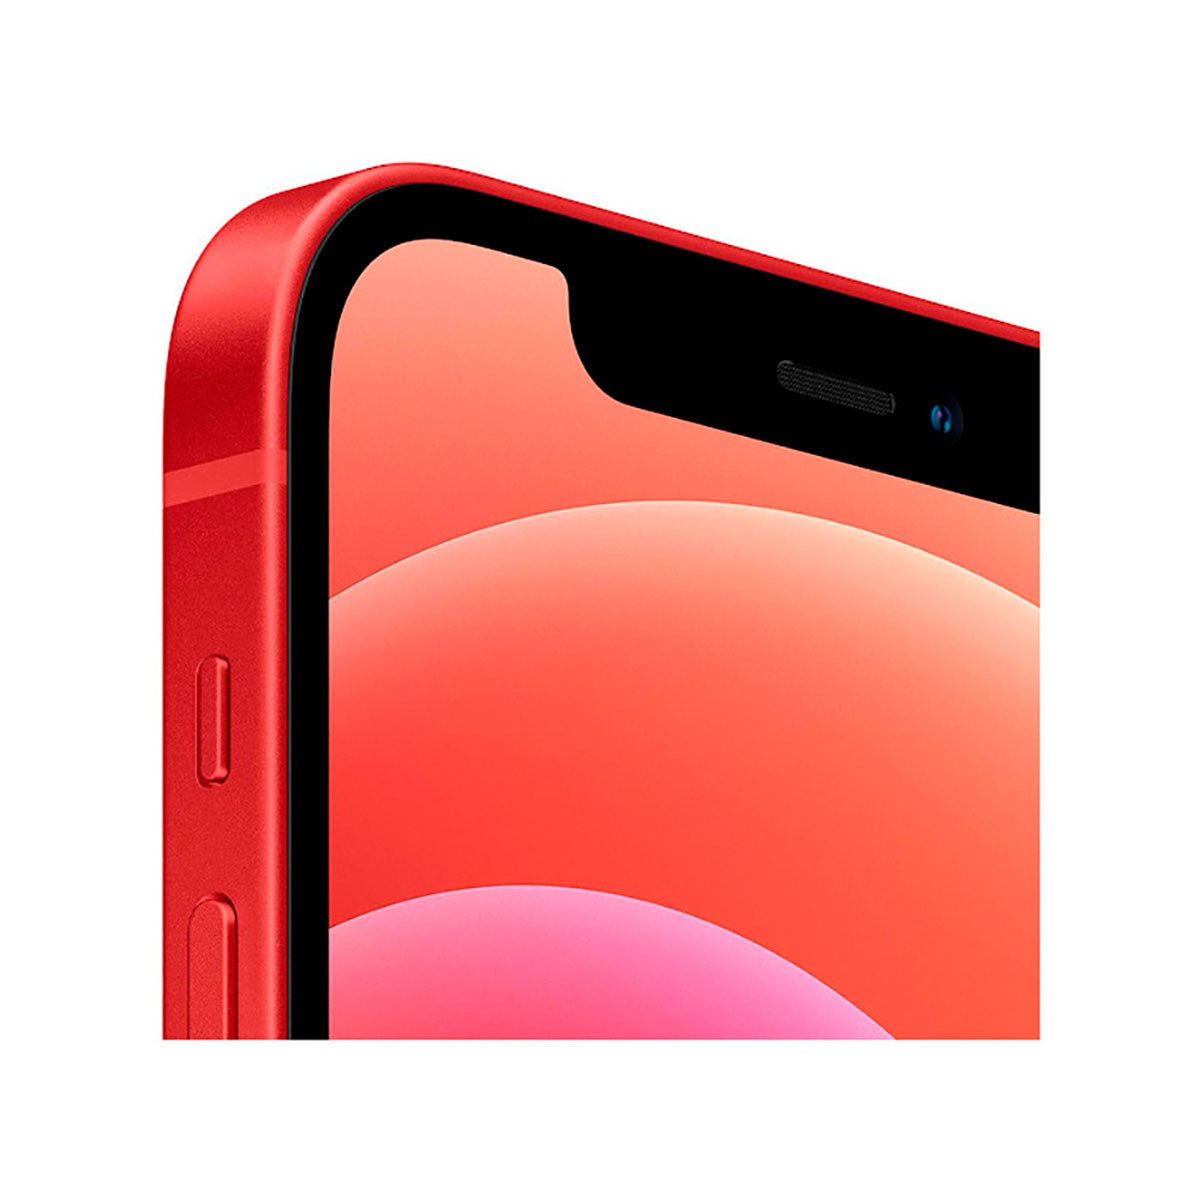 Apple iPhone 12 128GB Rojo (PRODUCT) RED Smartphone | Apple